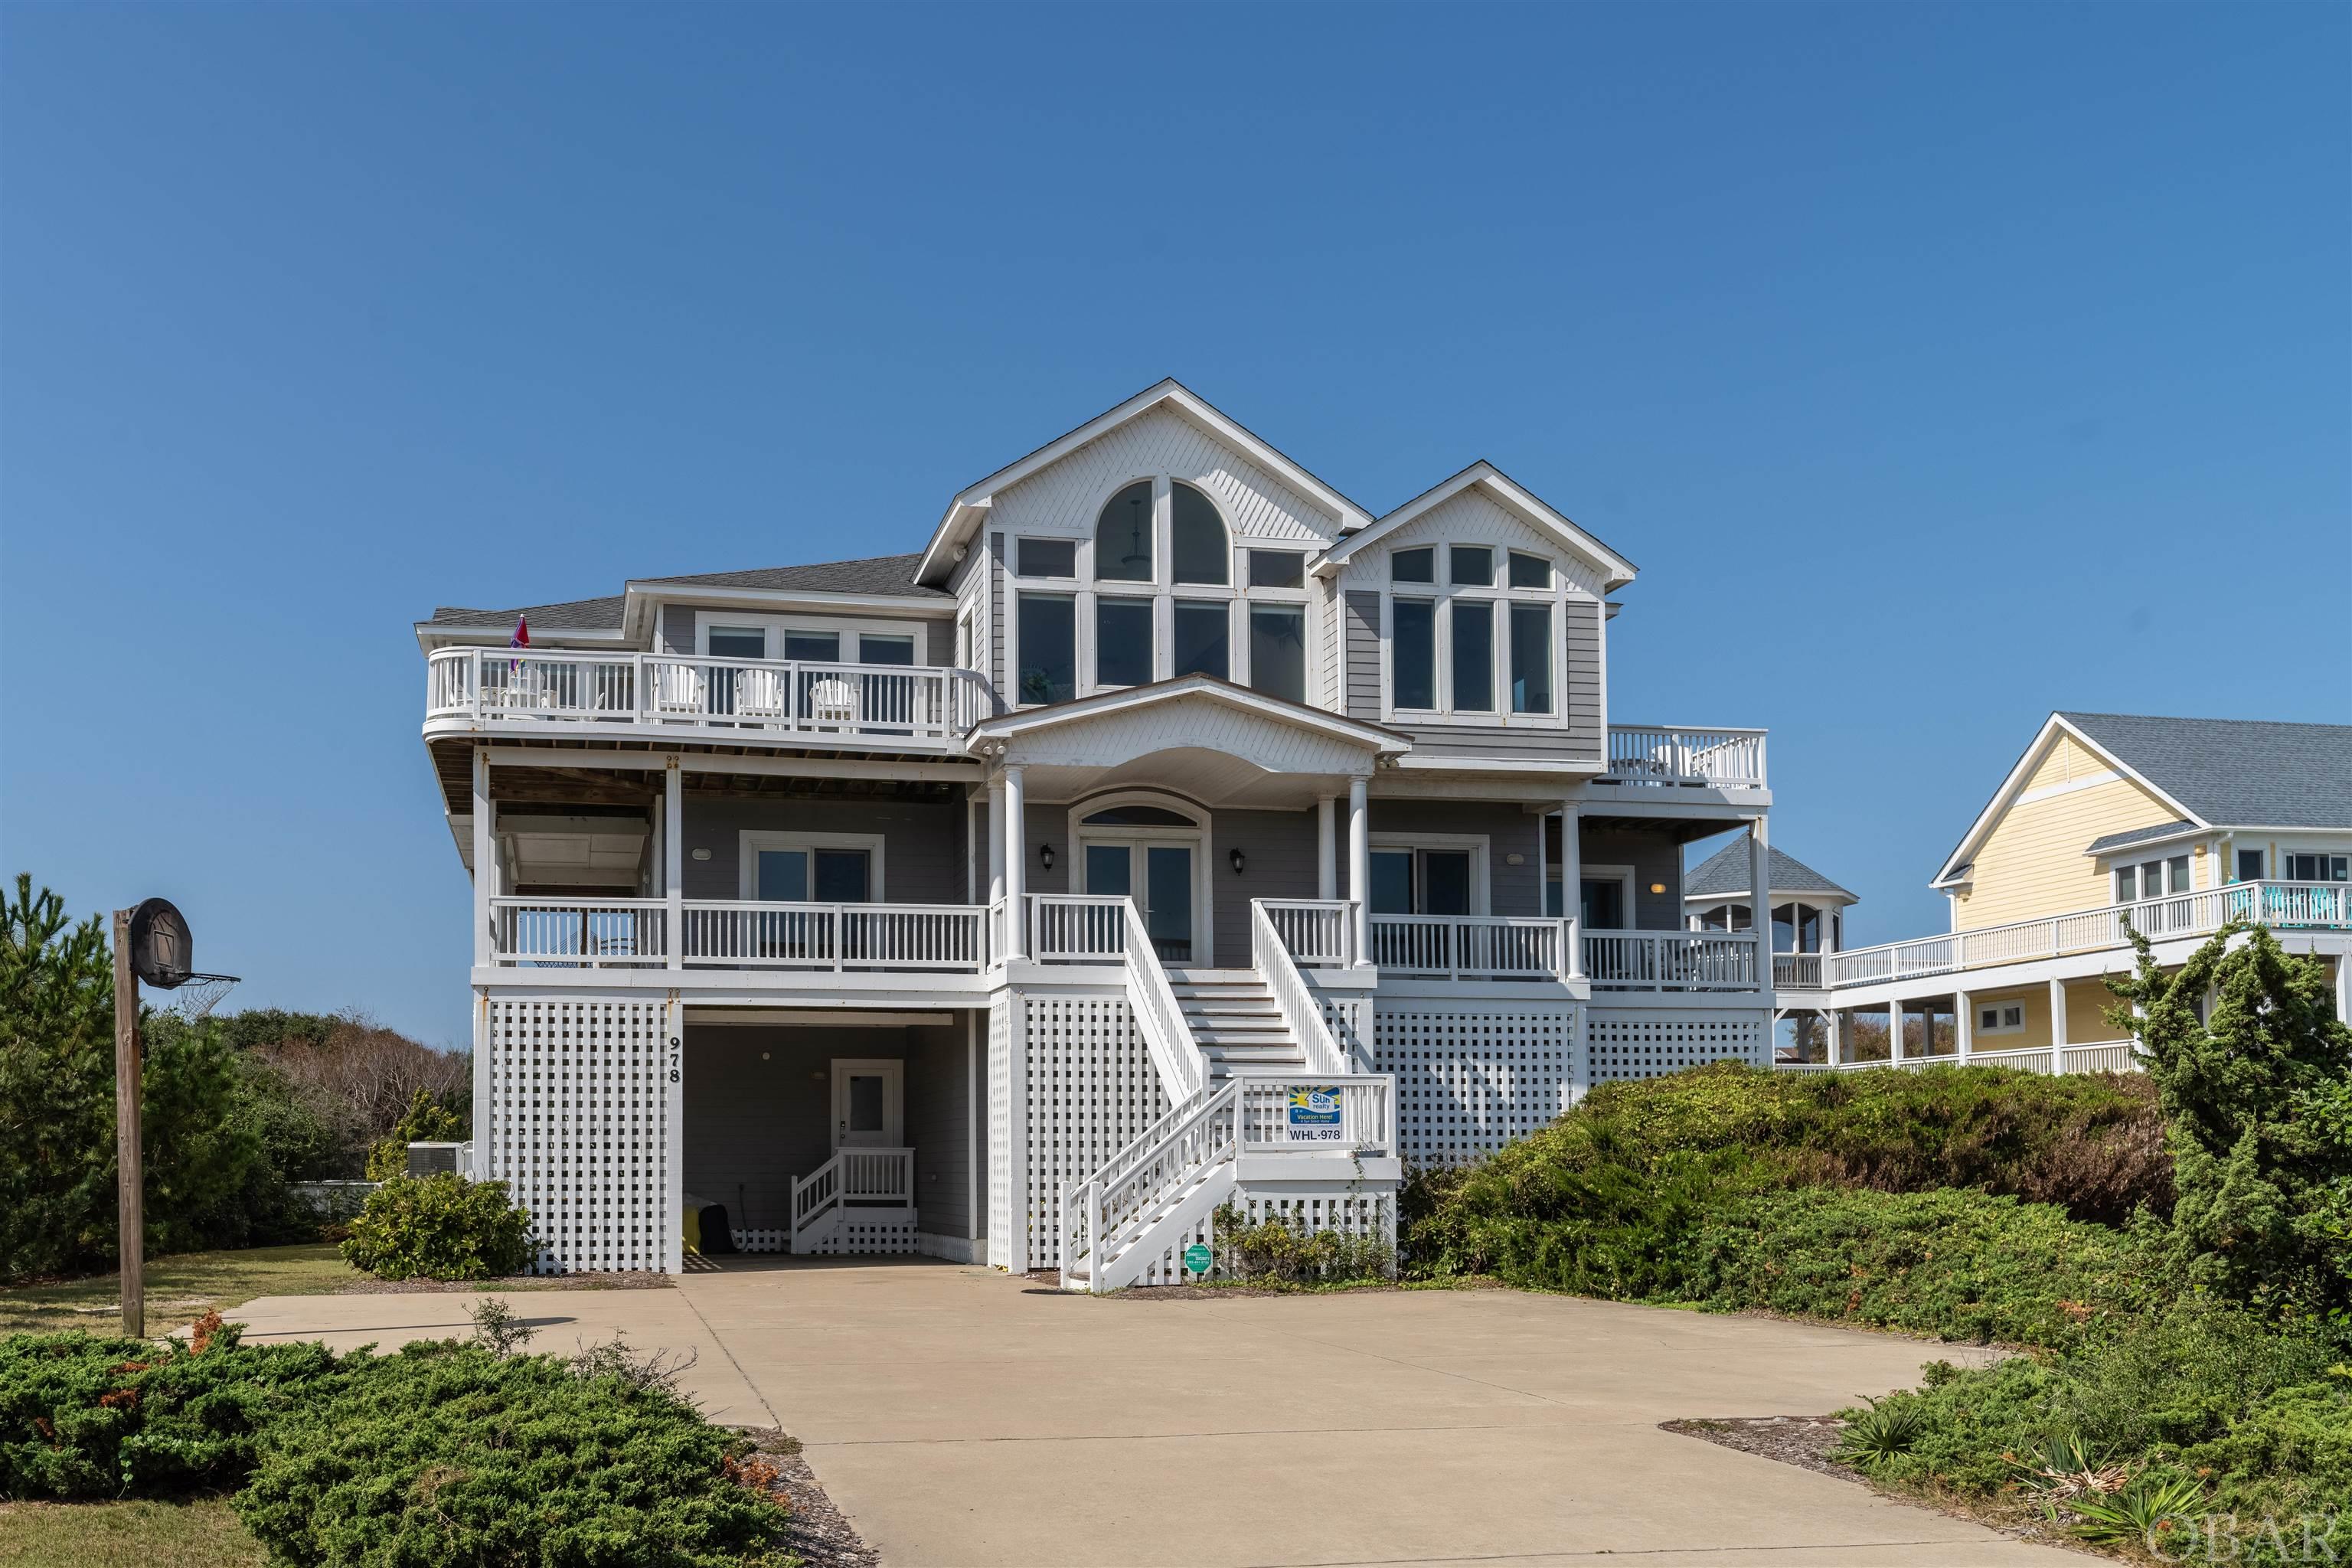 Stunning 10 bedroom estate situated on a spacious semi-oceanfront parcel, just steps to the beach in the heart of the Whalehead Community of Corolla. Boasting panoramic views of the ocean and a countless home amenity package, this is a home you don't want to miss! An open concept living room with large picture windows, a gas fireplace, wraparound sofa, and east facing decks serves as the perfect space to relax and take in the beautiful ocean view. A thoughtfully designed kitchen with stainless steel appliances and countertop seating, dual appliances, a wine fridge, as well as two dining areas, provide plenty of seating and room to prepare for family meals. Step out onto the top level sun deck to watch the sun rise over the Atlantic or to enjoy an afternoon cocktail at the high rise dining table. A half bath, king en suite with private bath, private balcony and fireplace, in addition to a king en suite with private bath (accessed from deck only) complete this top level of living. Relax and unwind after time spent soaking up the sun on the mid level which includes 4 king en suites with private baths (2 with deck access), a queen en suite with a private bath and deck access, an office/study, queen sleeper sofa, half bath, and covered decks. Make your way downstairs for more entertainment where you'll find the rec room with pool table, card table, and a kitchenette with full sized refrigerator, microwave, and dishwasher, in addition to a theater room, arcade area perfect for kids, queen en suite with private bath, two pyramid bunk bedrooms with trundle beds, a full shared bath, and half bath. Step outside to the private pool area with hot tub, half bath, covered cabana bar, outdoor shower, and spacious fenced and landscaped backyard. Enjoy the convenience of a full-sized laundry room with storage, an elevator to all levels, community beach access just 350 feet away, and local shops & dining within walking or biking distance! It's no surprise that this is a sought after home to vacation with friends, family, and guests alike each year!